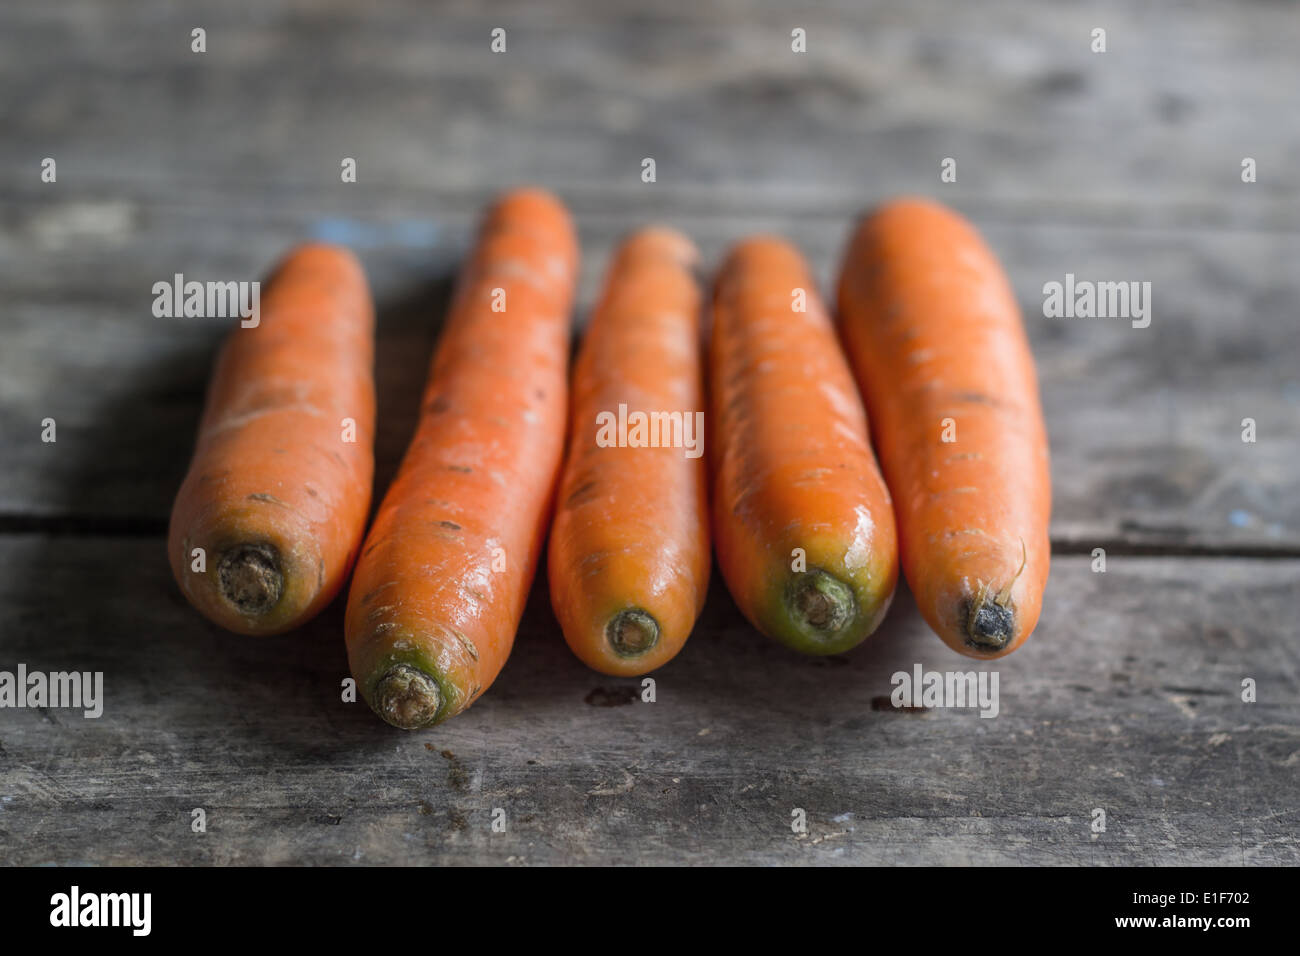 fresh organic carrots on wooden table, natural light Stock Photo